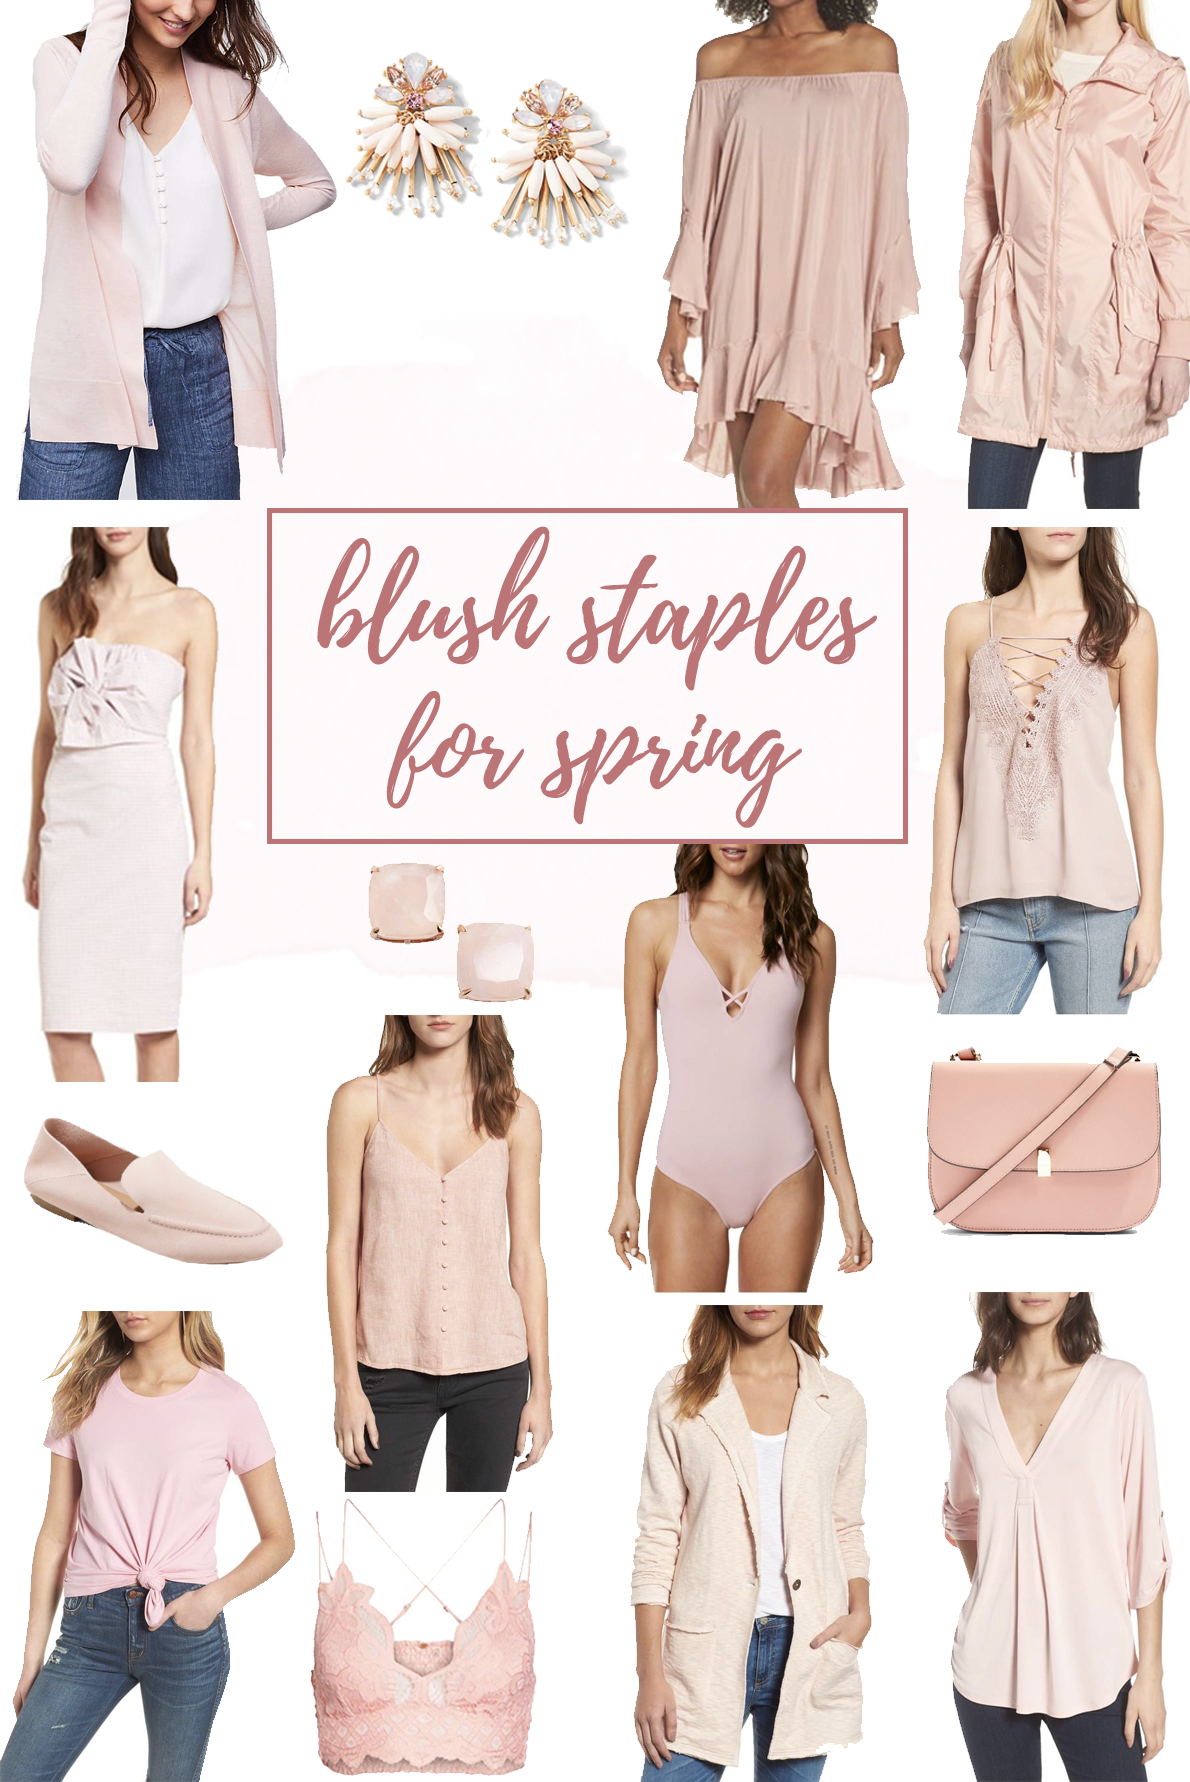 Blush Staples for Spring | Connecticut Style Blog